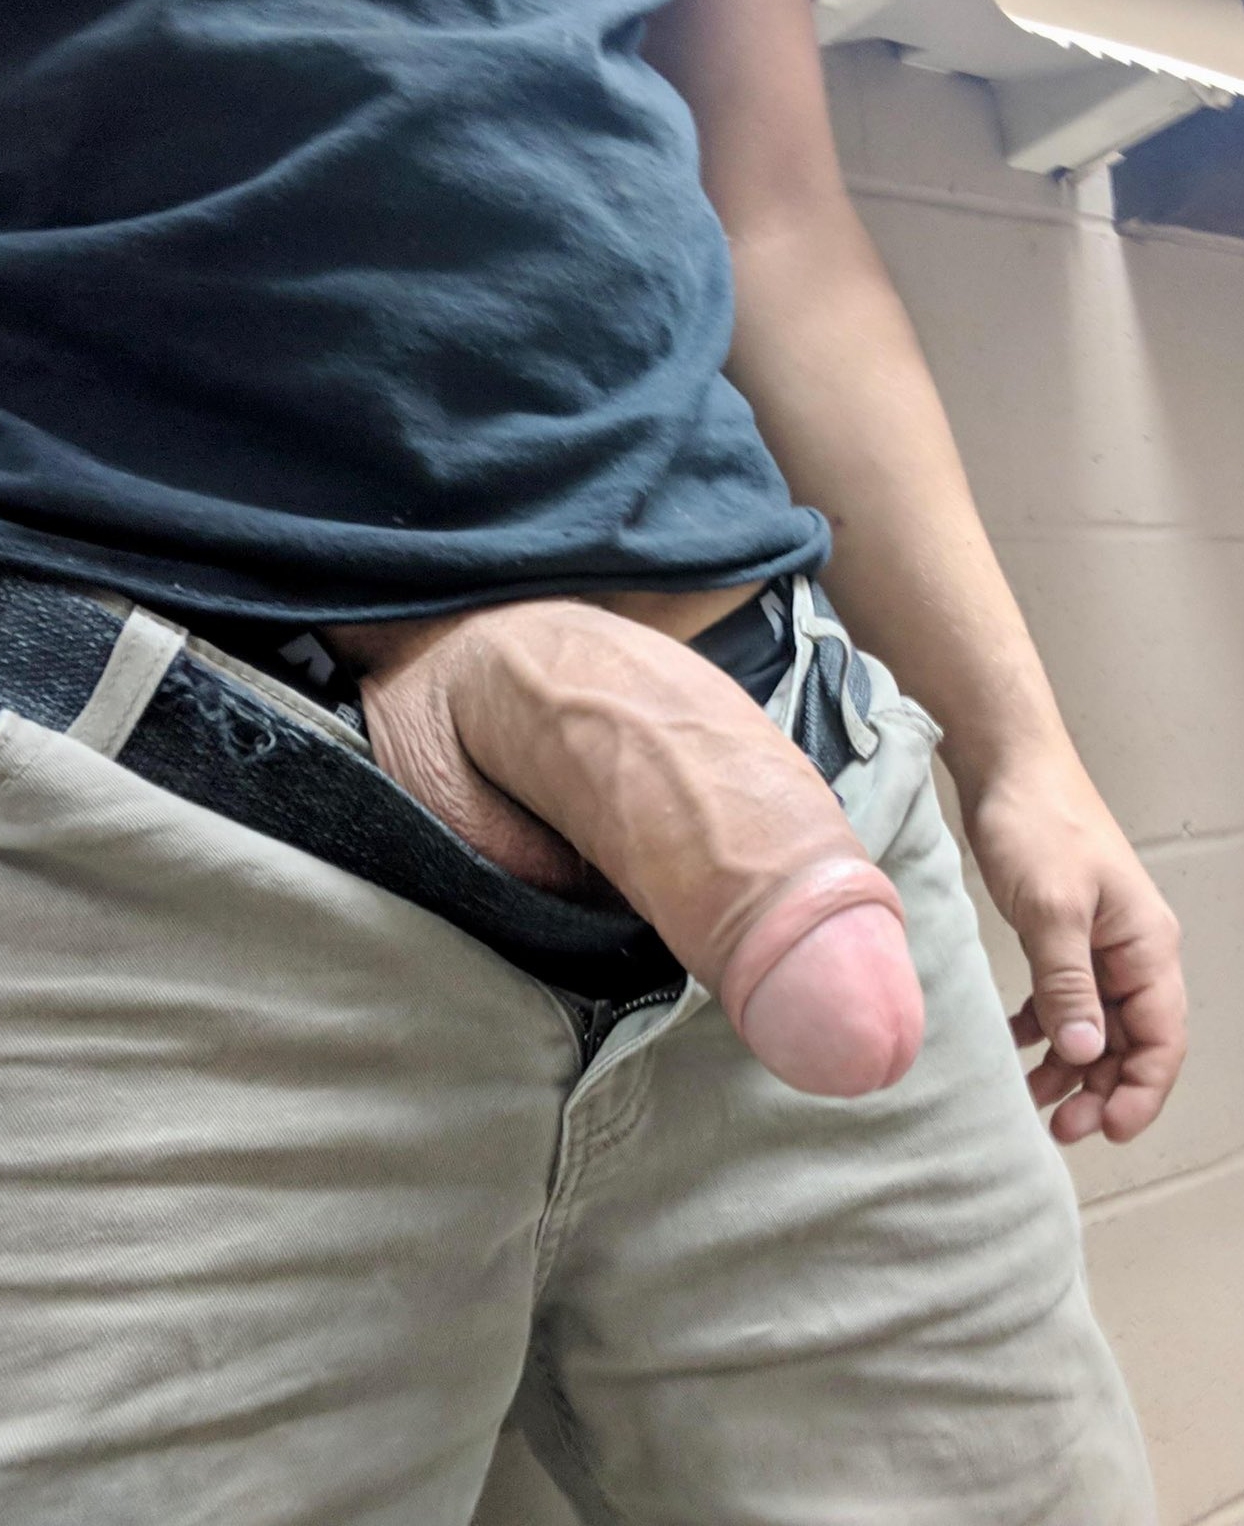 Thick dick out of pants